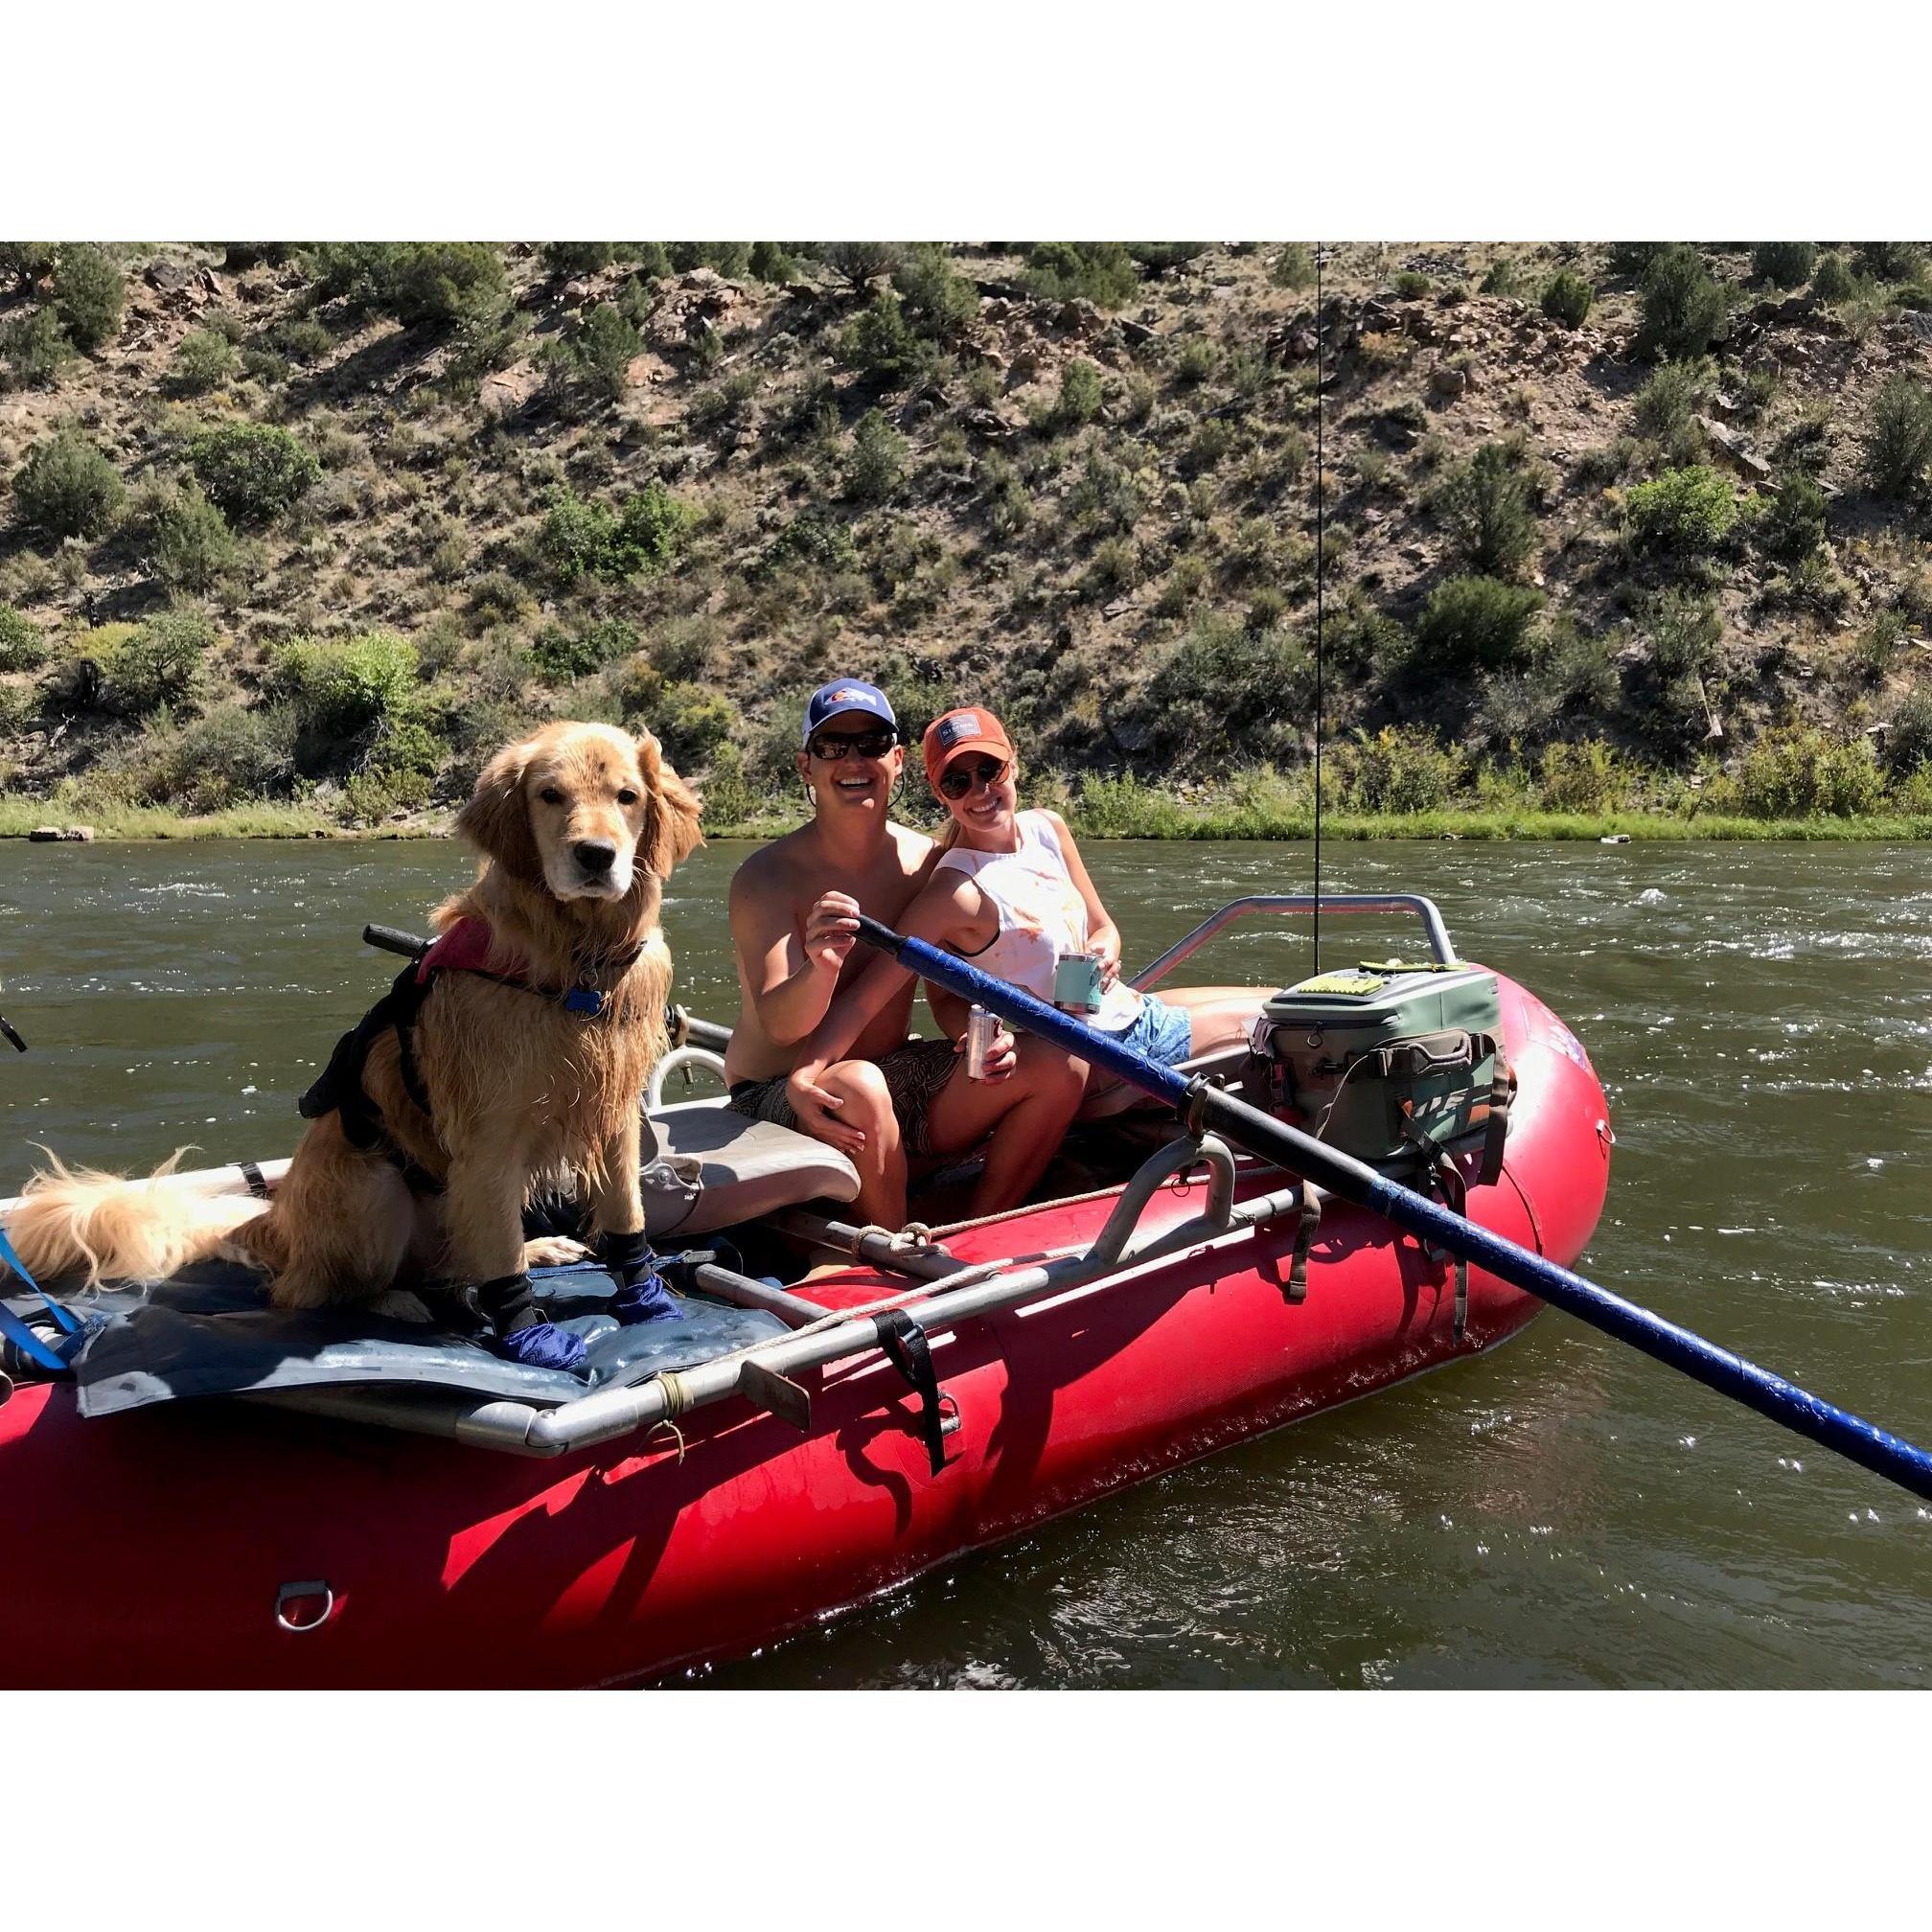 Floating the Colorado River, our new favorite past time!